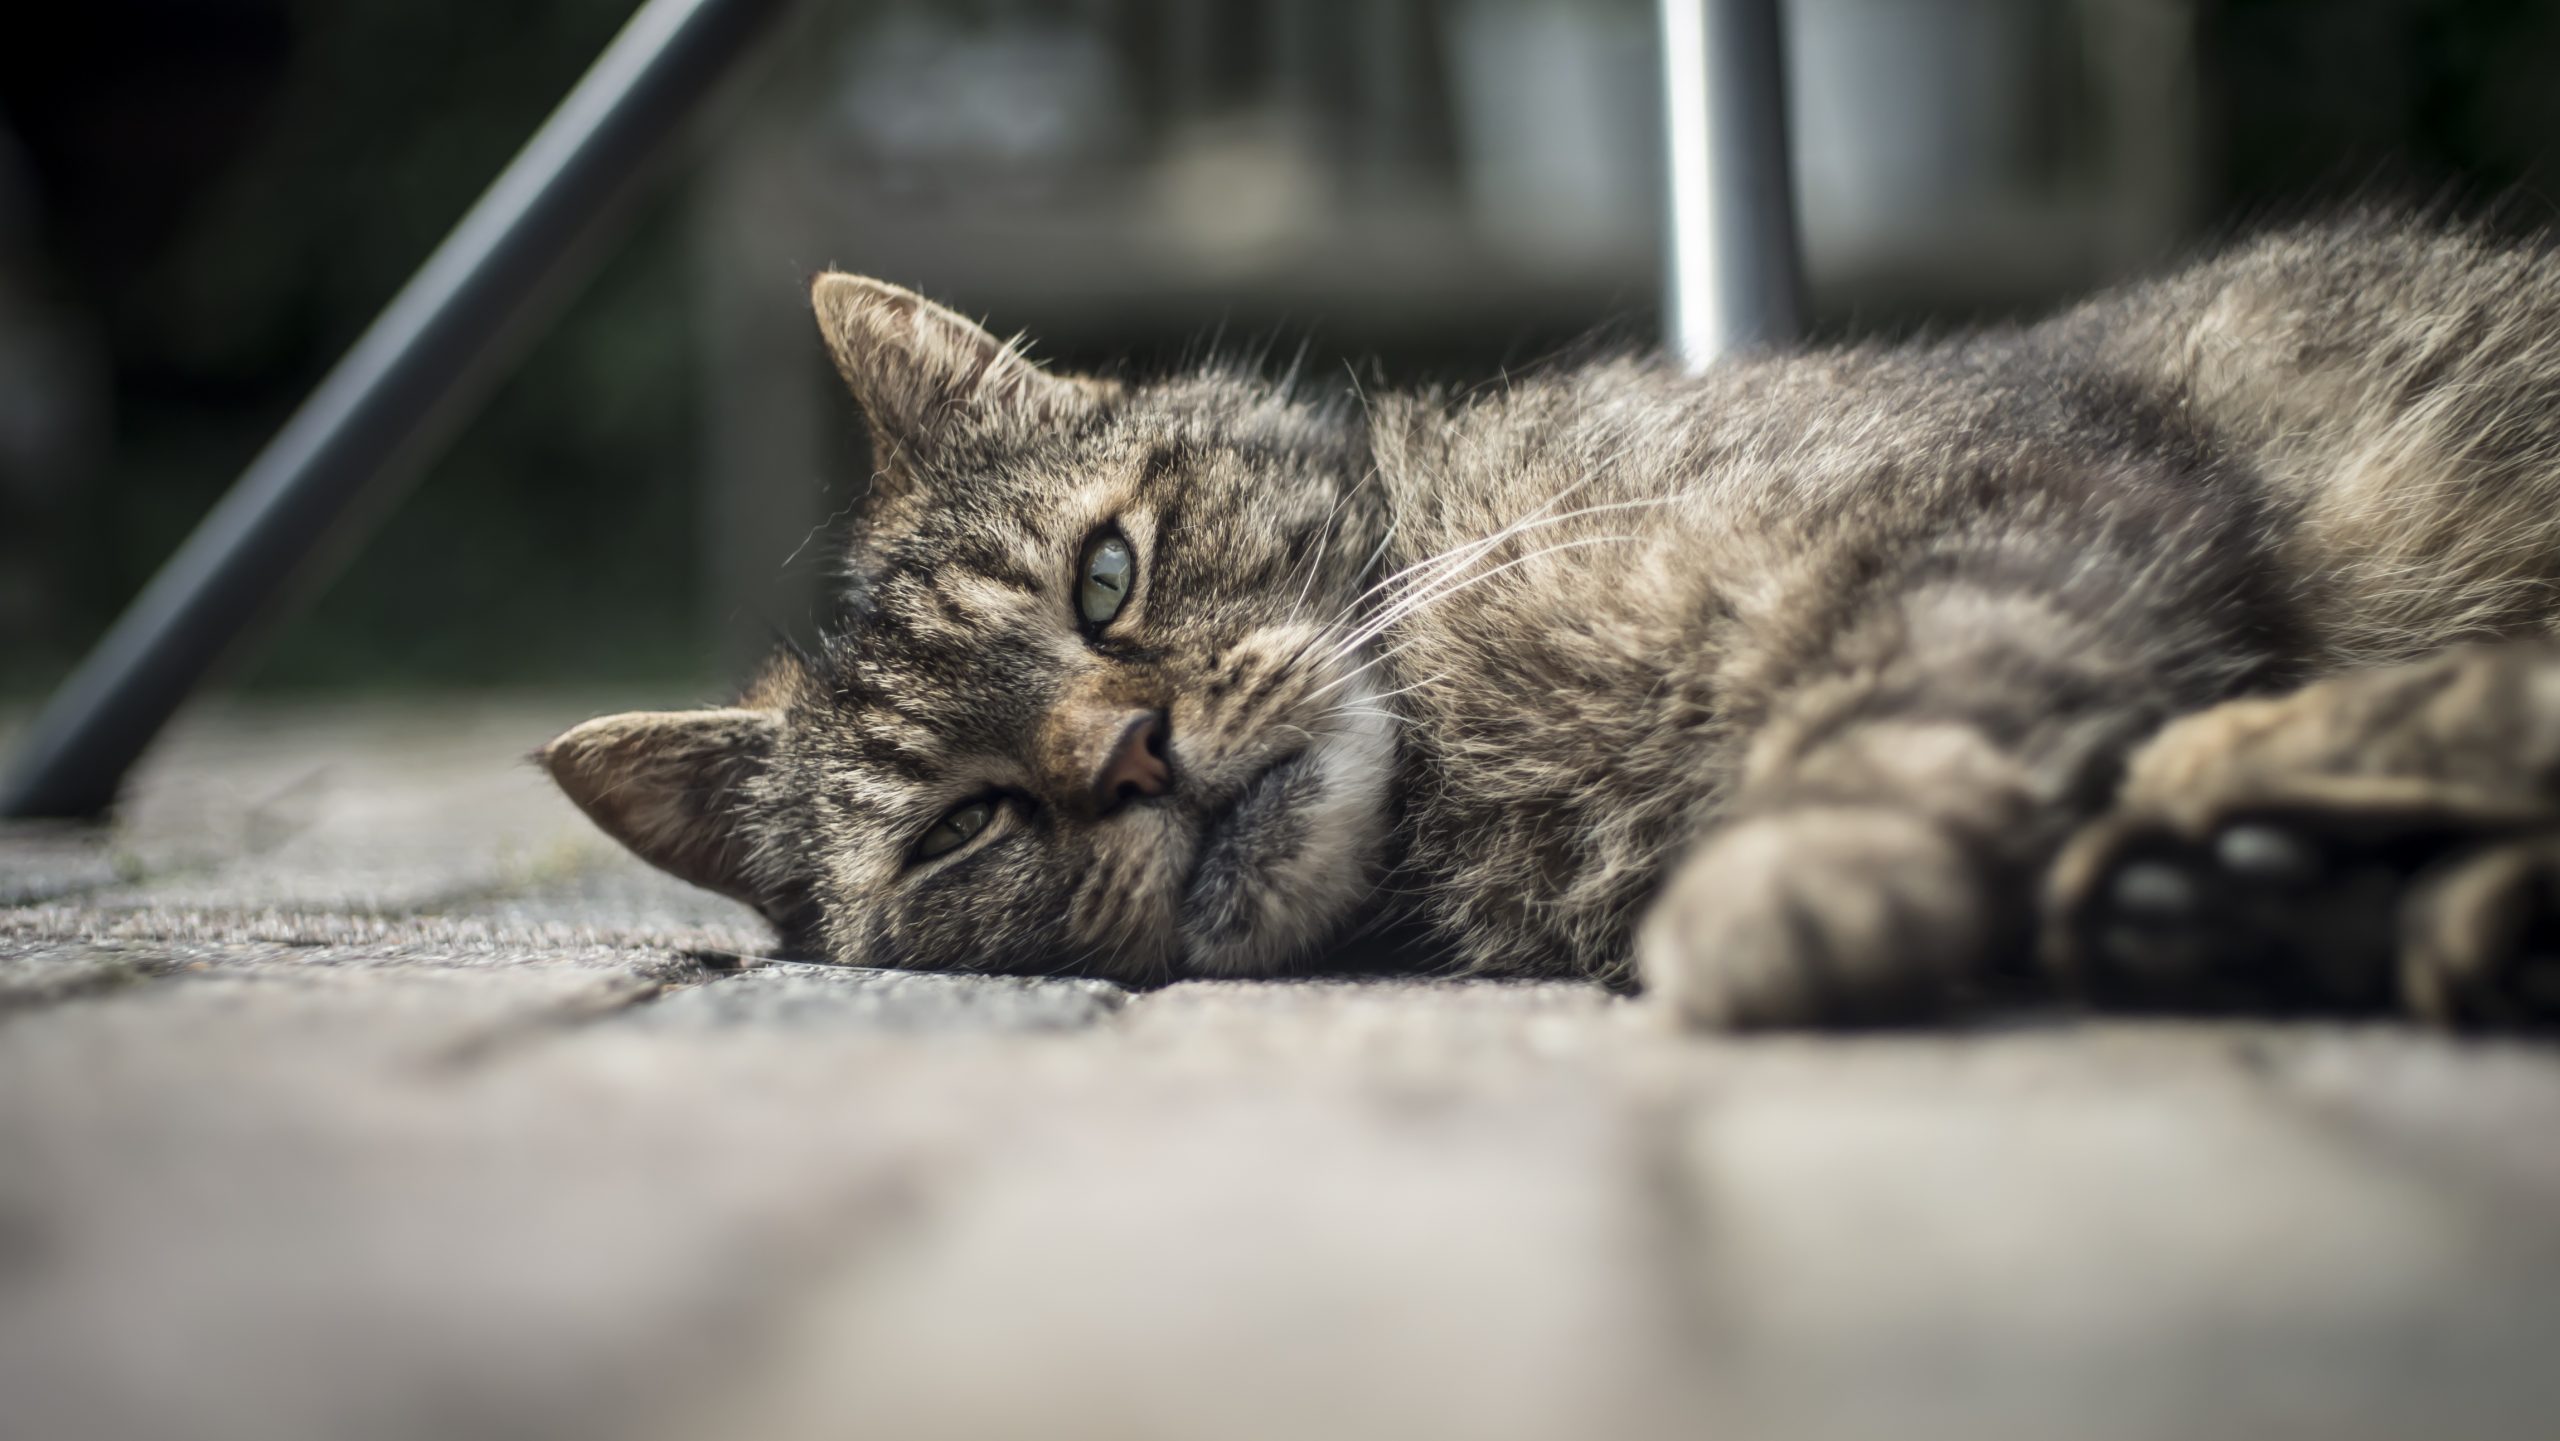 Cat or feline diabetes occurs when their bodies cannot properly regulate blood sugar levels.